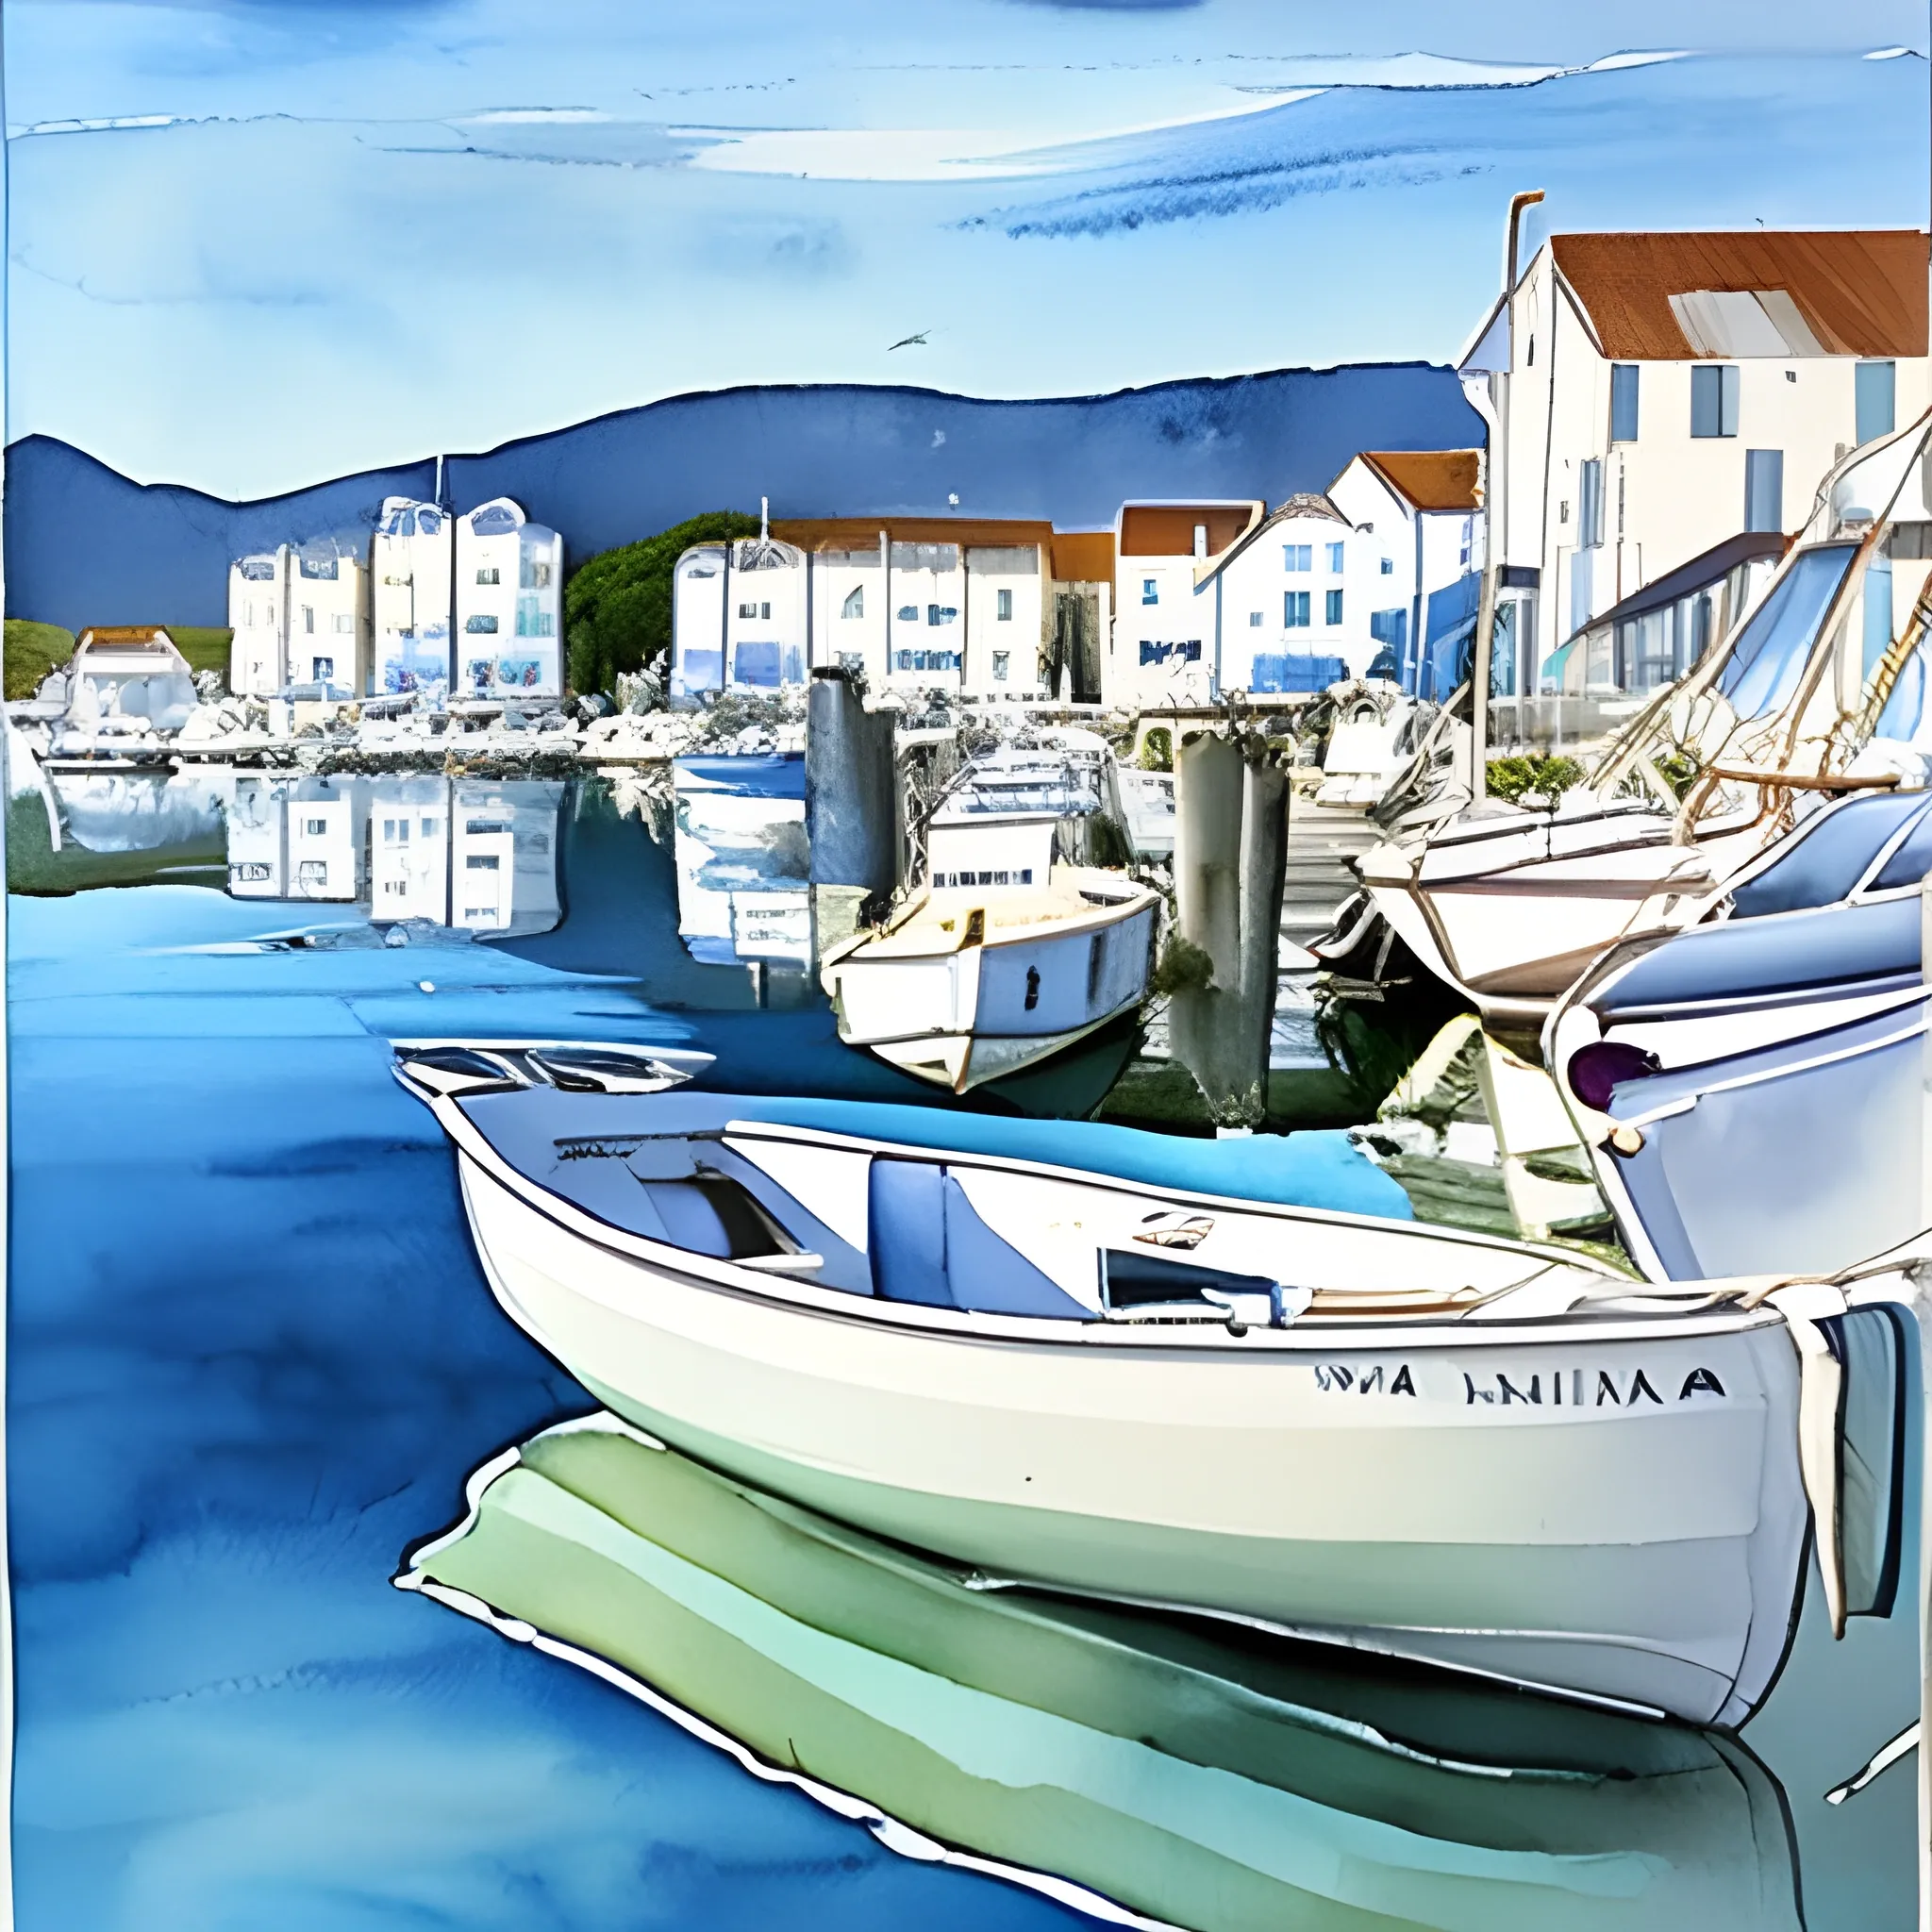 marina, one boat, reflections, horizon, shore, white houses, fisherman, in the distance, Water Color